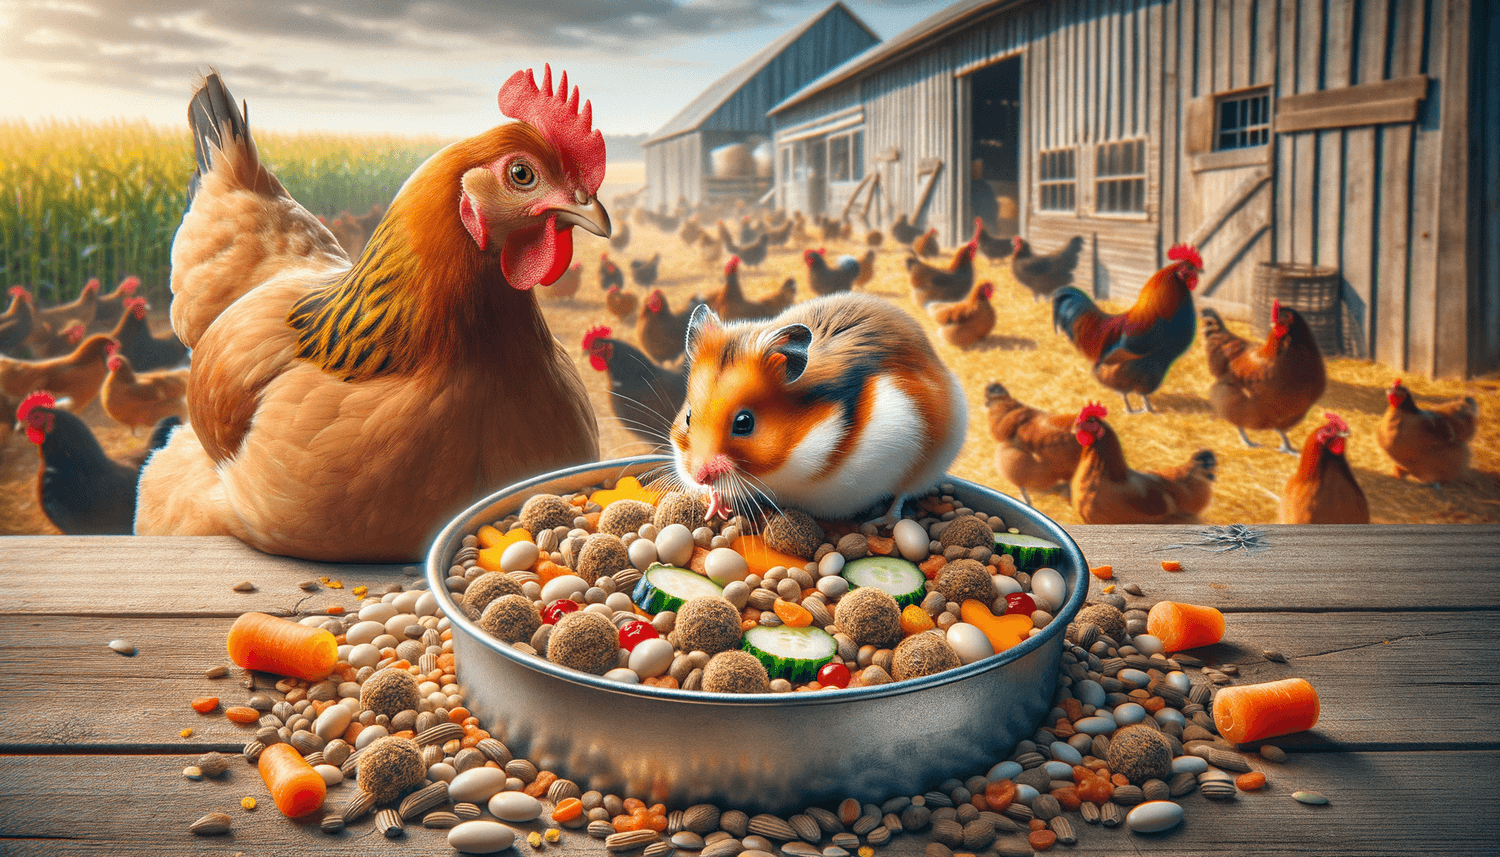 Can Chickens Eat Hamster Food?